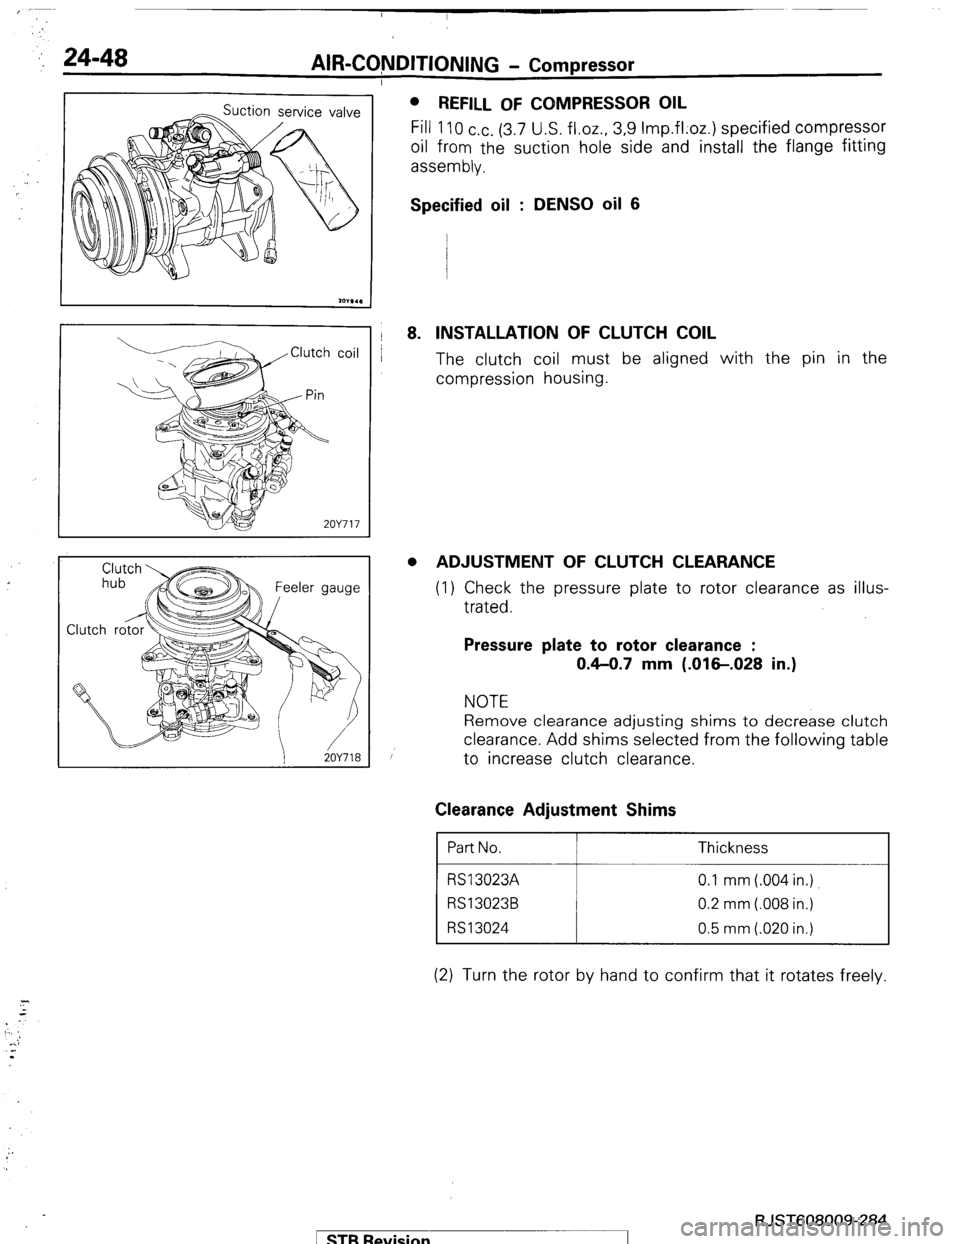 MITSUBISHI MONTERO 1987 1.G Workshop Manual ,: 24-48 AIR-CQNDITIONING - Compressor 
I 
2OY717 
1 iOY718 l 
REFILL OF COMPRESSOR OIL 
Fill 110 cc. (3.7 U.S. fl.oz., 3.9 Imp.fl;oz.) specified compressor 
oil from the suction hole side and install